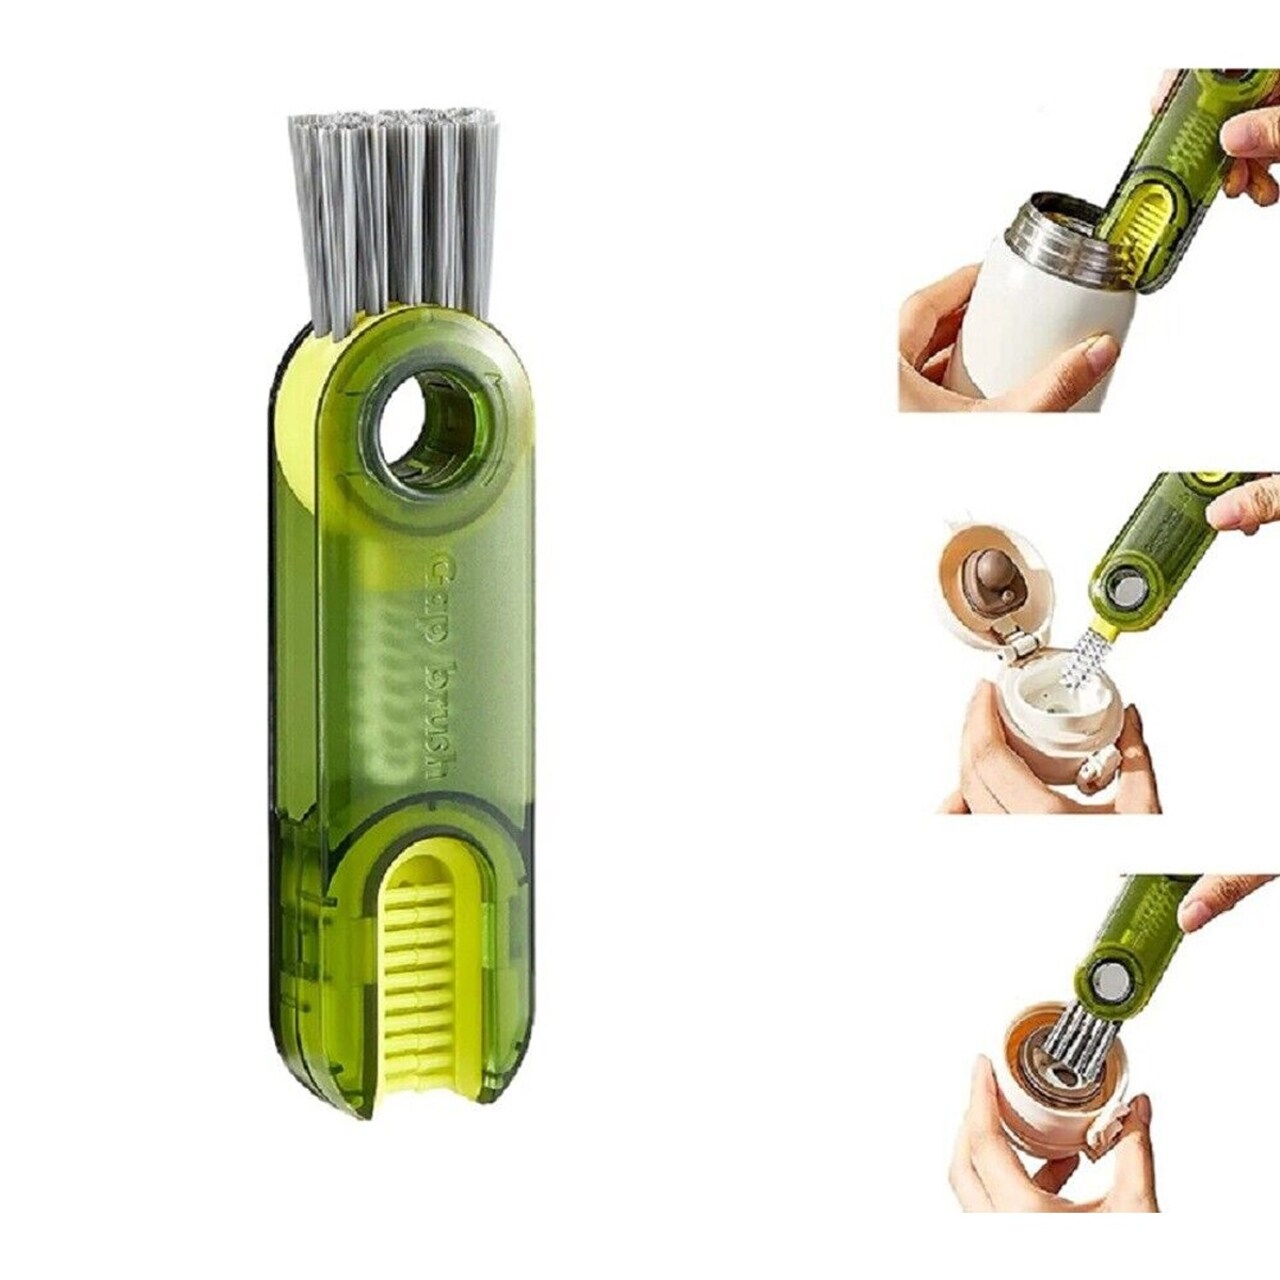 3 in 1 Multifunctional Cleaning Brush Set